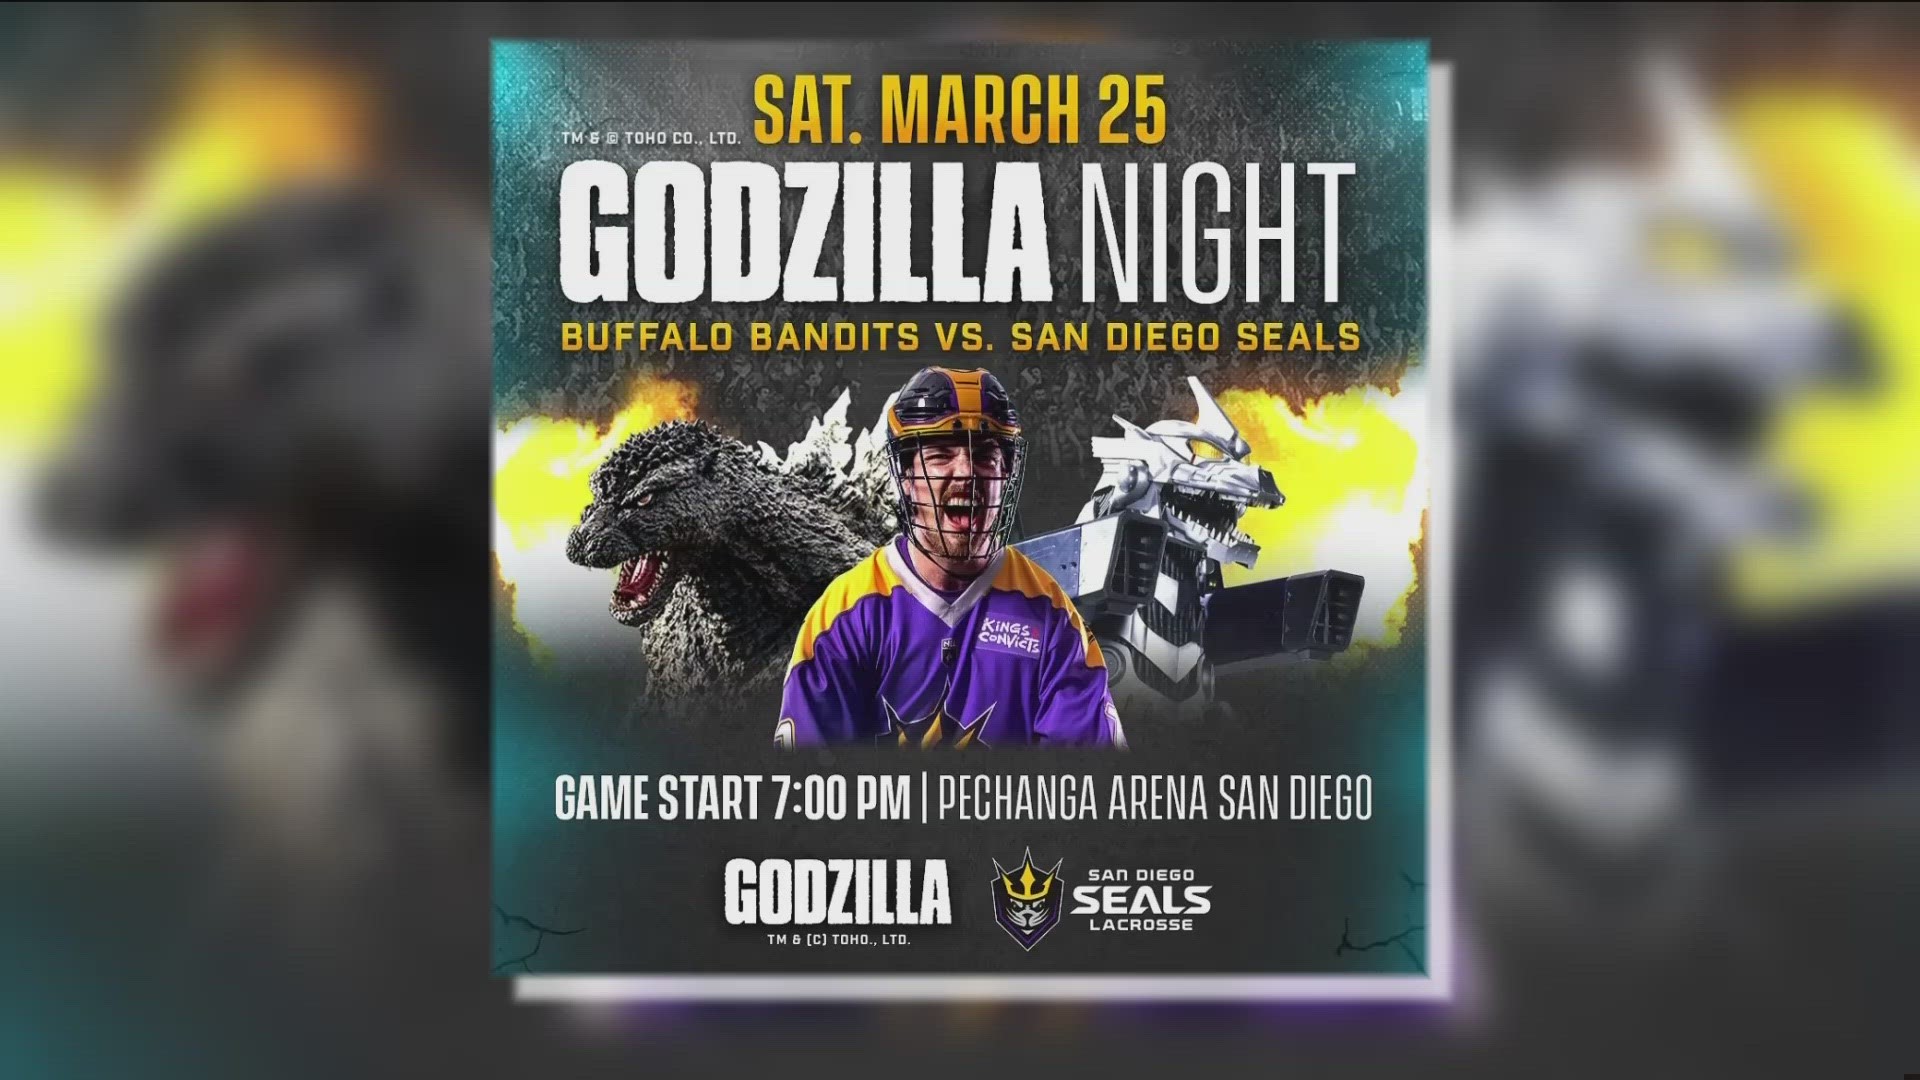 Dan Funk, Jake Govett and a few of the Sirens talked about Friday’s game in Texas as well as Saturday’s game that will be Godzilla Night at Pechanga Arena